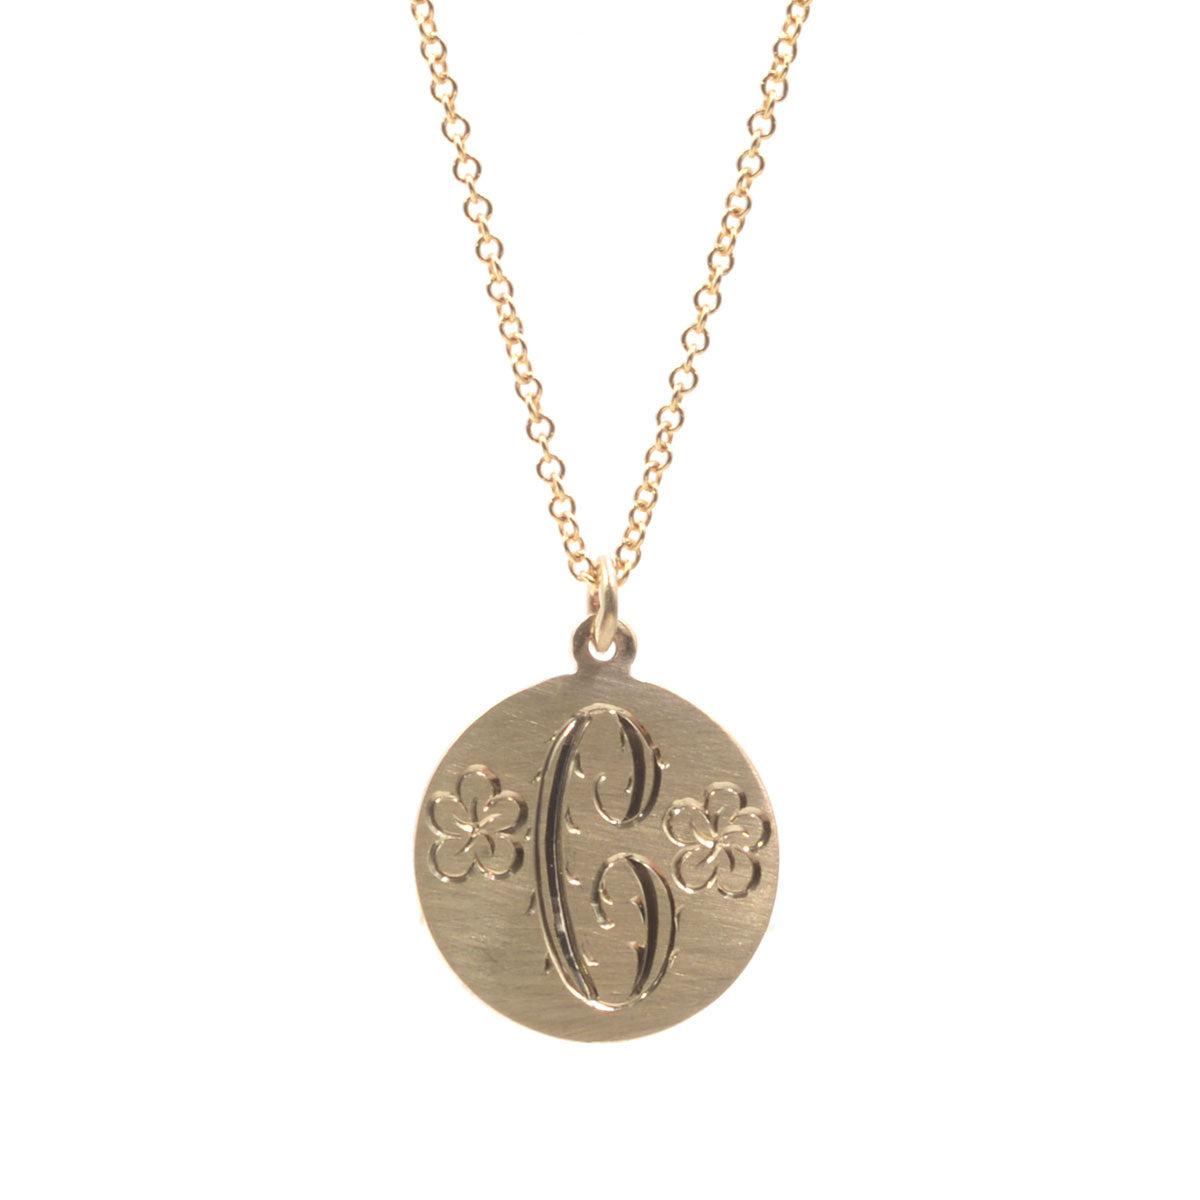 Custom Initial Necklace Engraved Charm Necklace for Women 